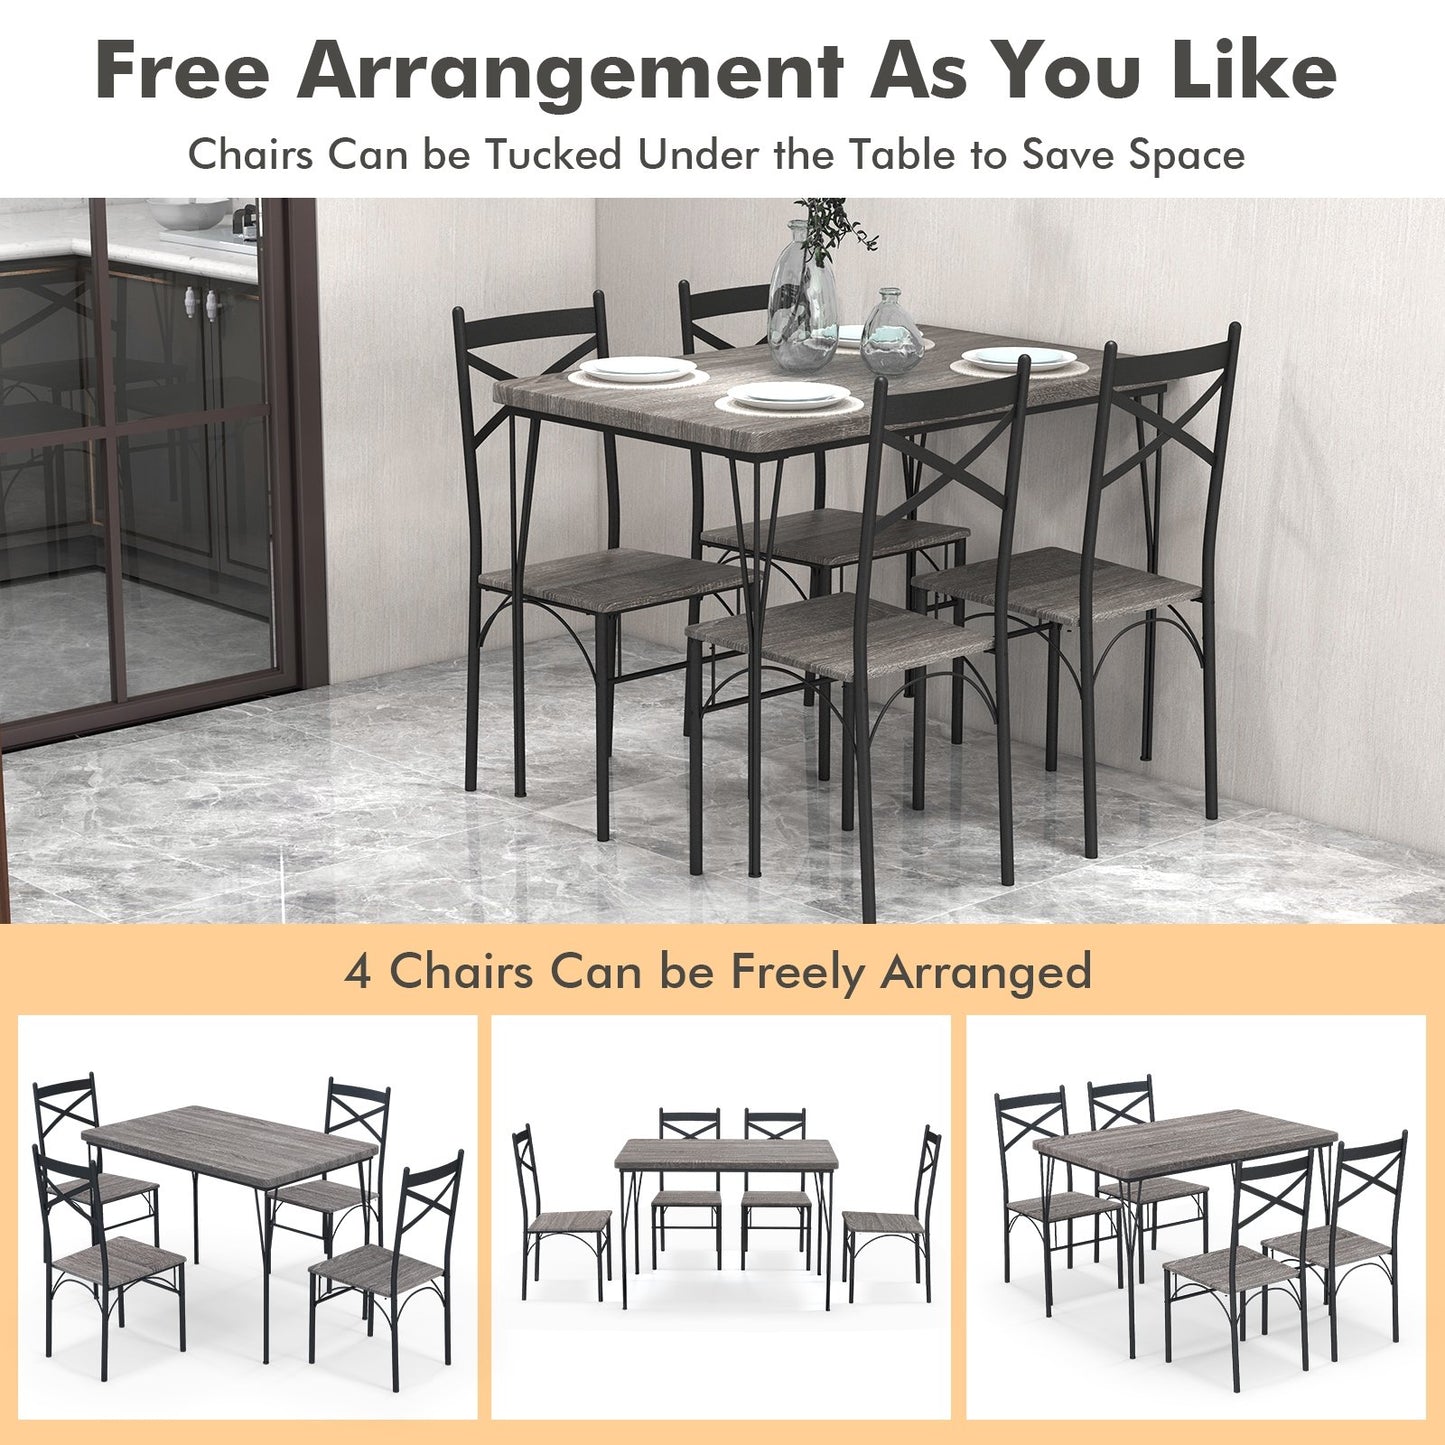 5 Pieces Dining Table Set with Metal Frame for Kitchen Dining Room, Gray